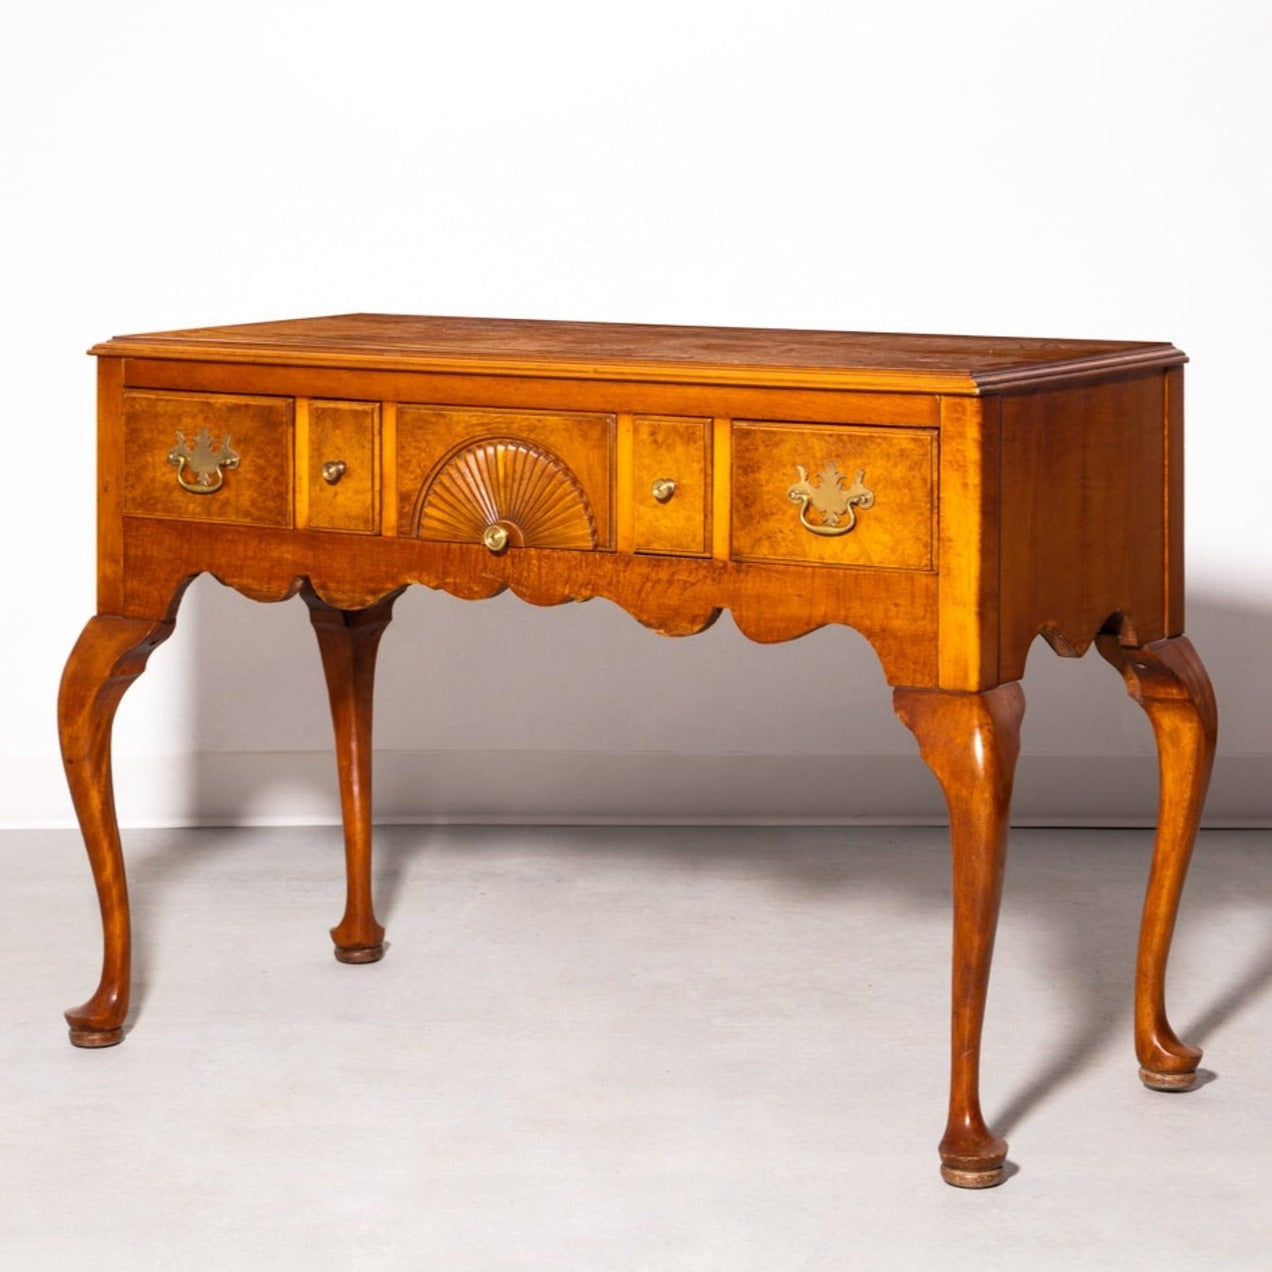 Queen Anne Style tiger maple desk / dressing table